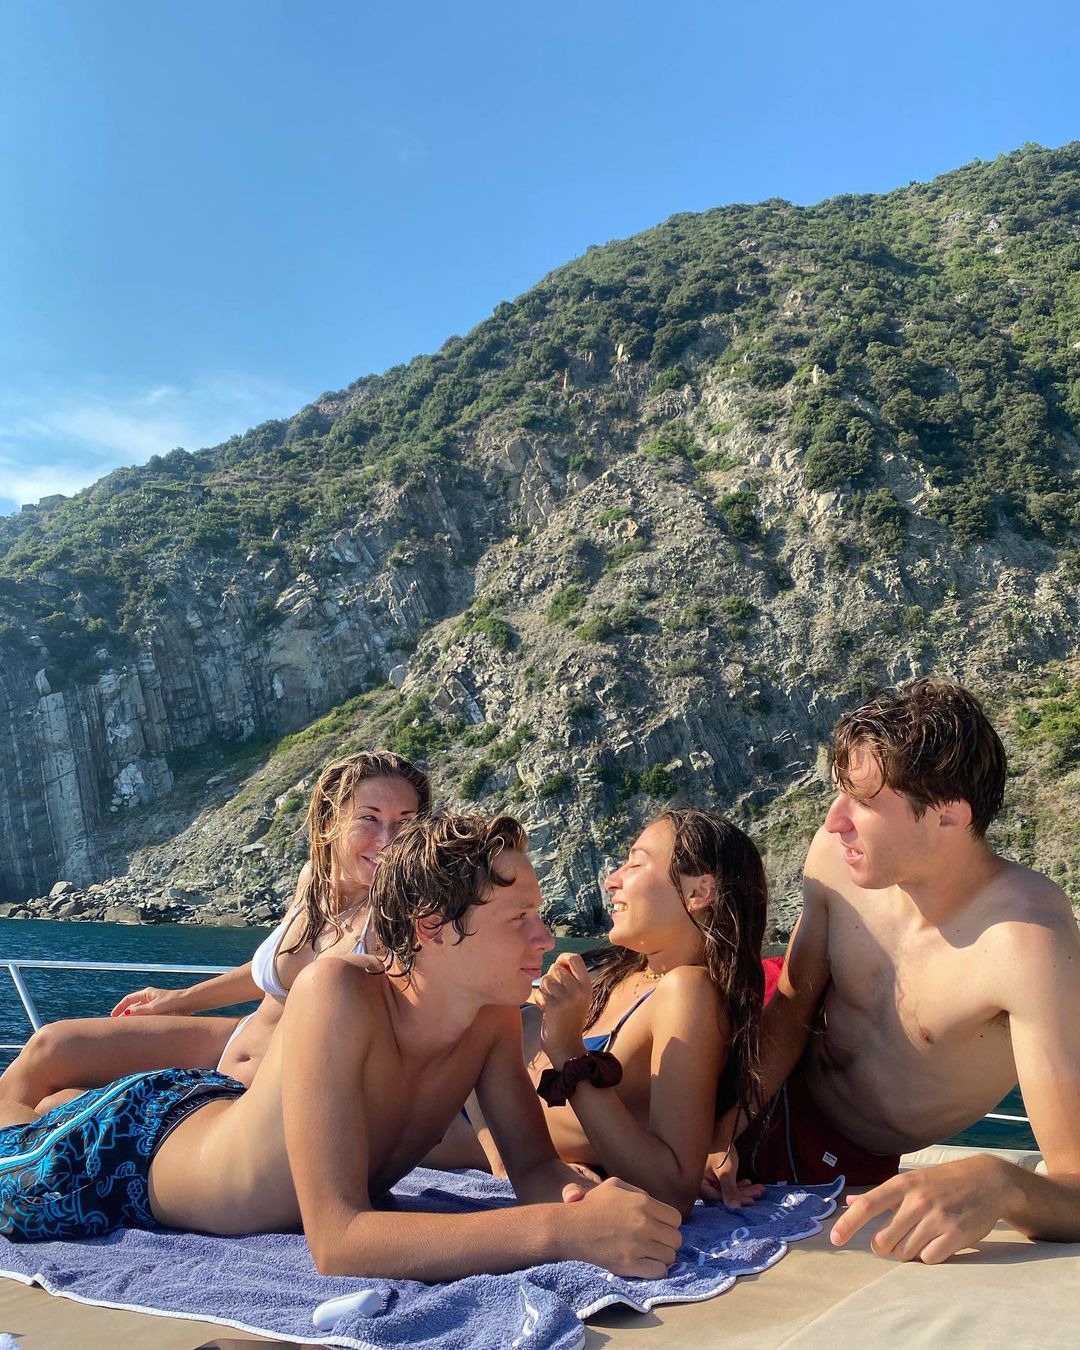 Francesca Lombardi (at the back) enjoying her holiday with three kids.